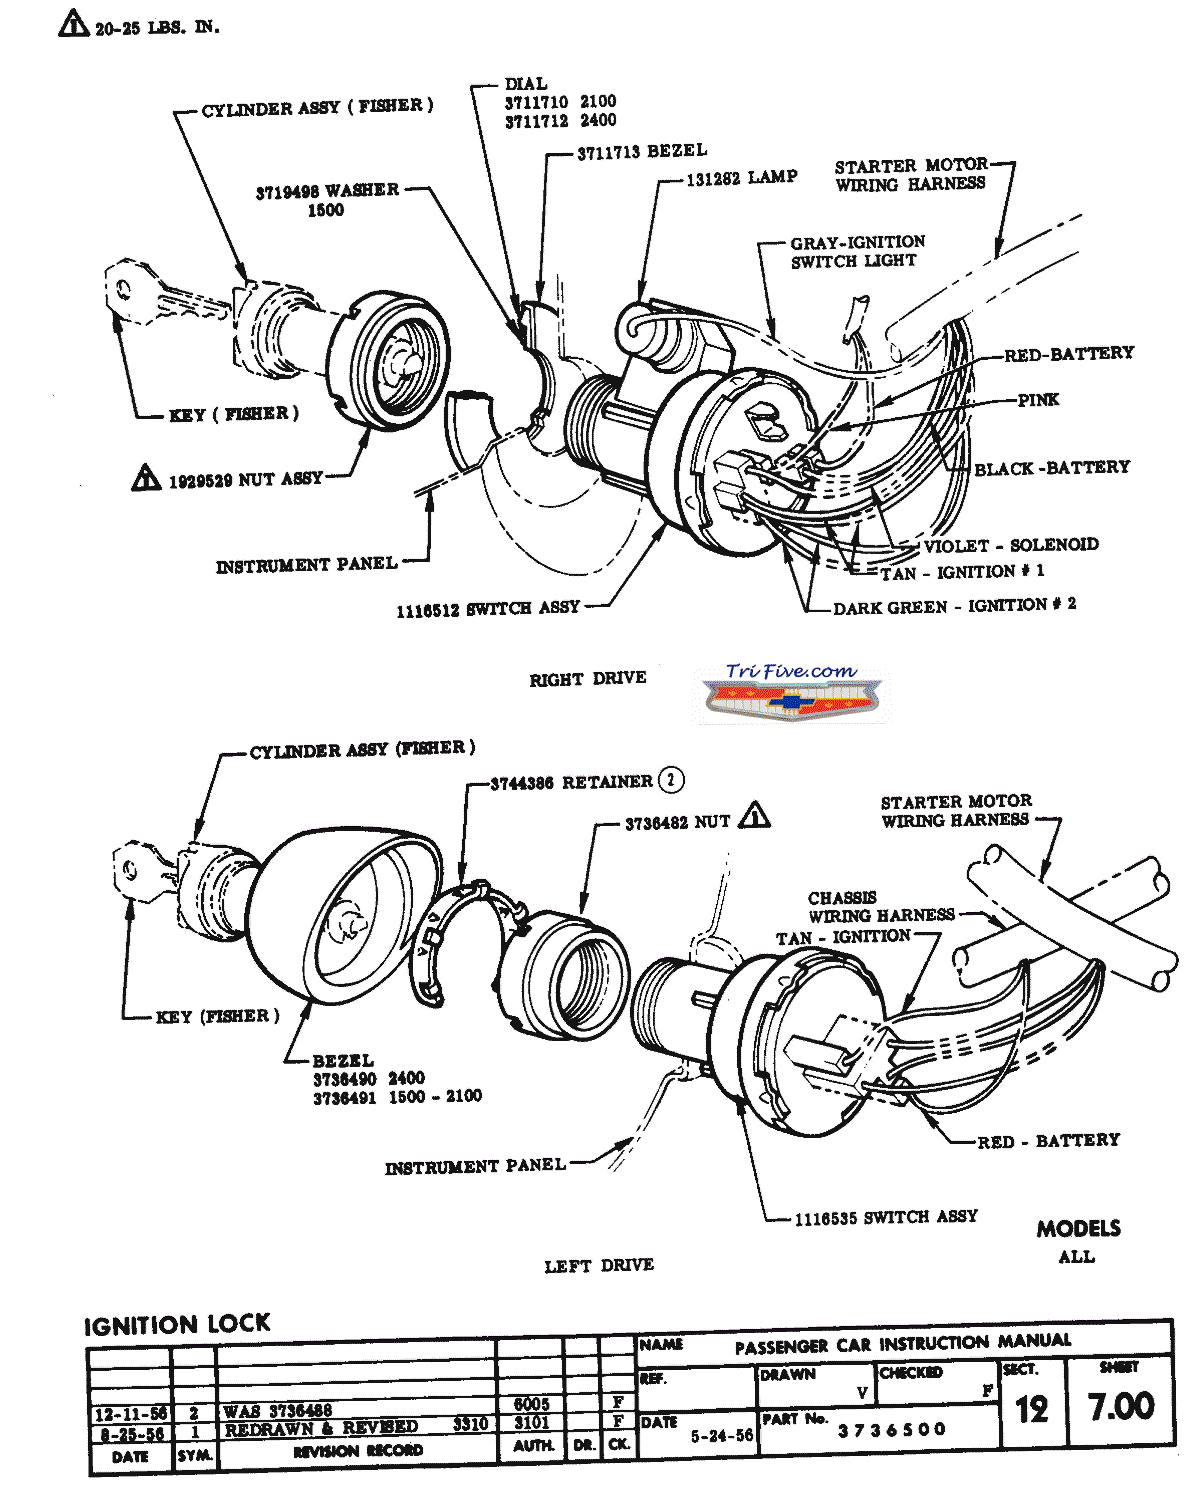 1953 Chevy Truck Headlight Switch Wiring Diagram from getdrawings.com